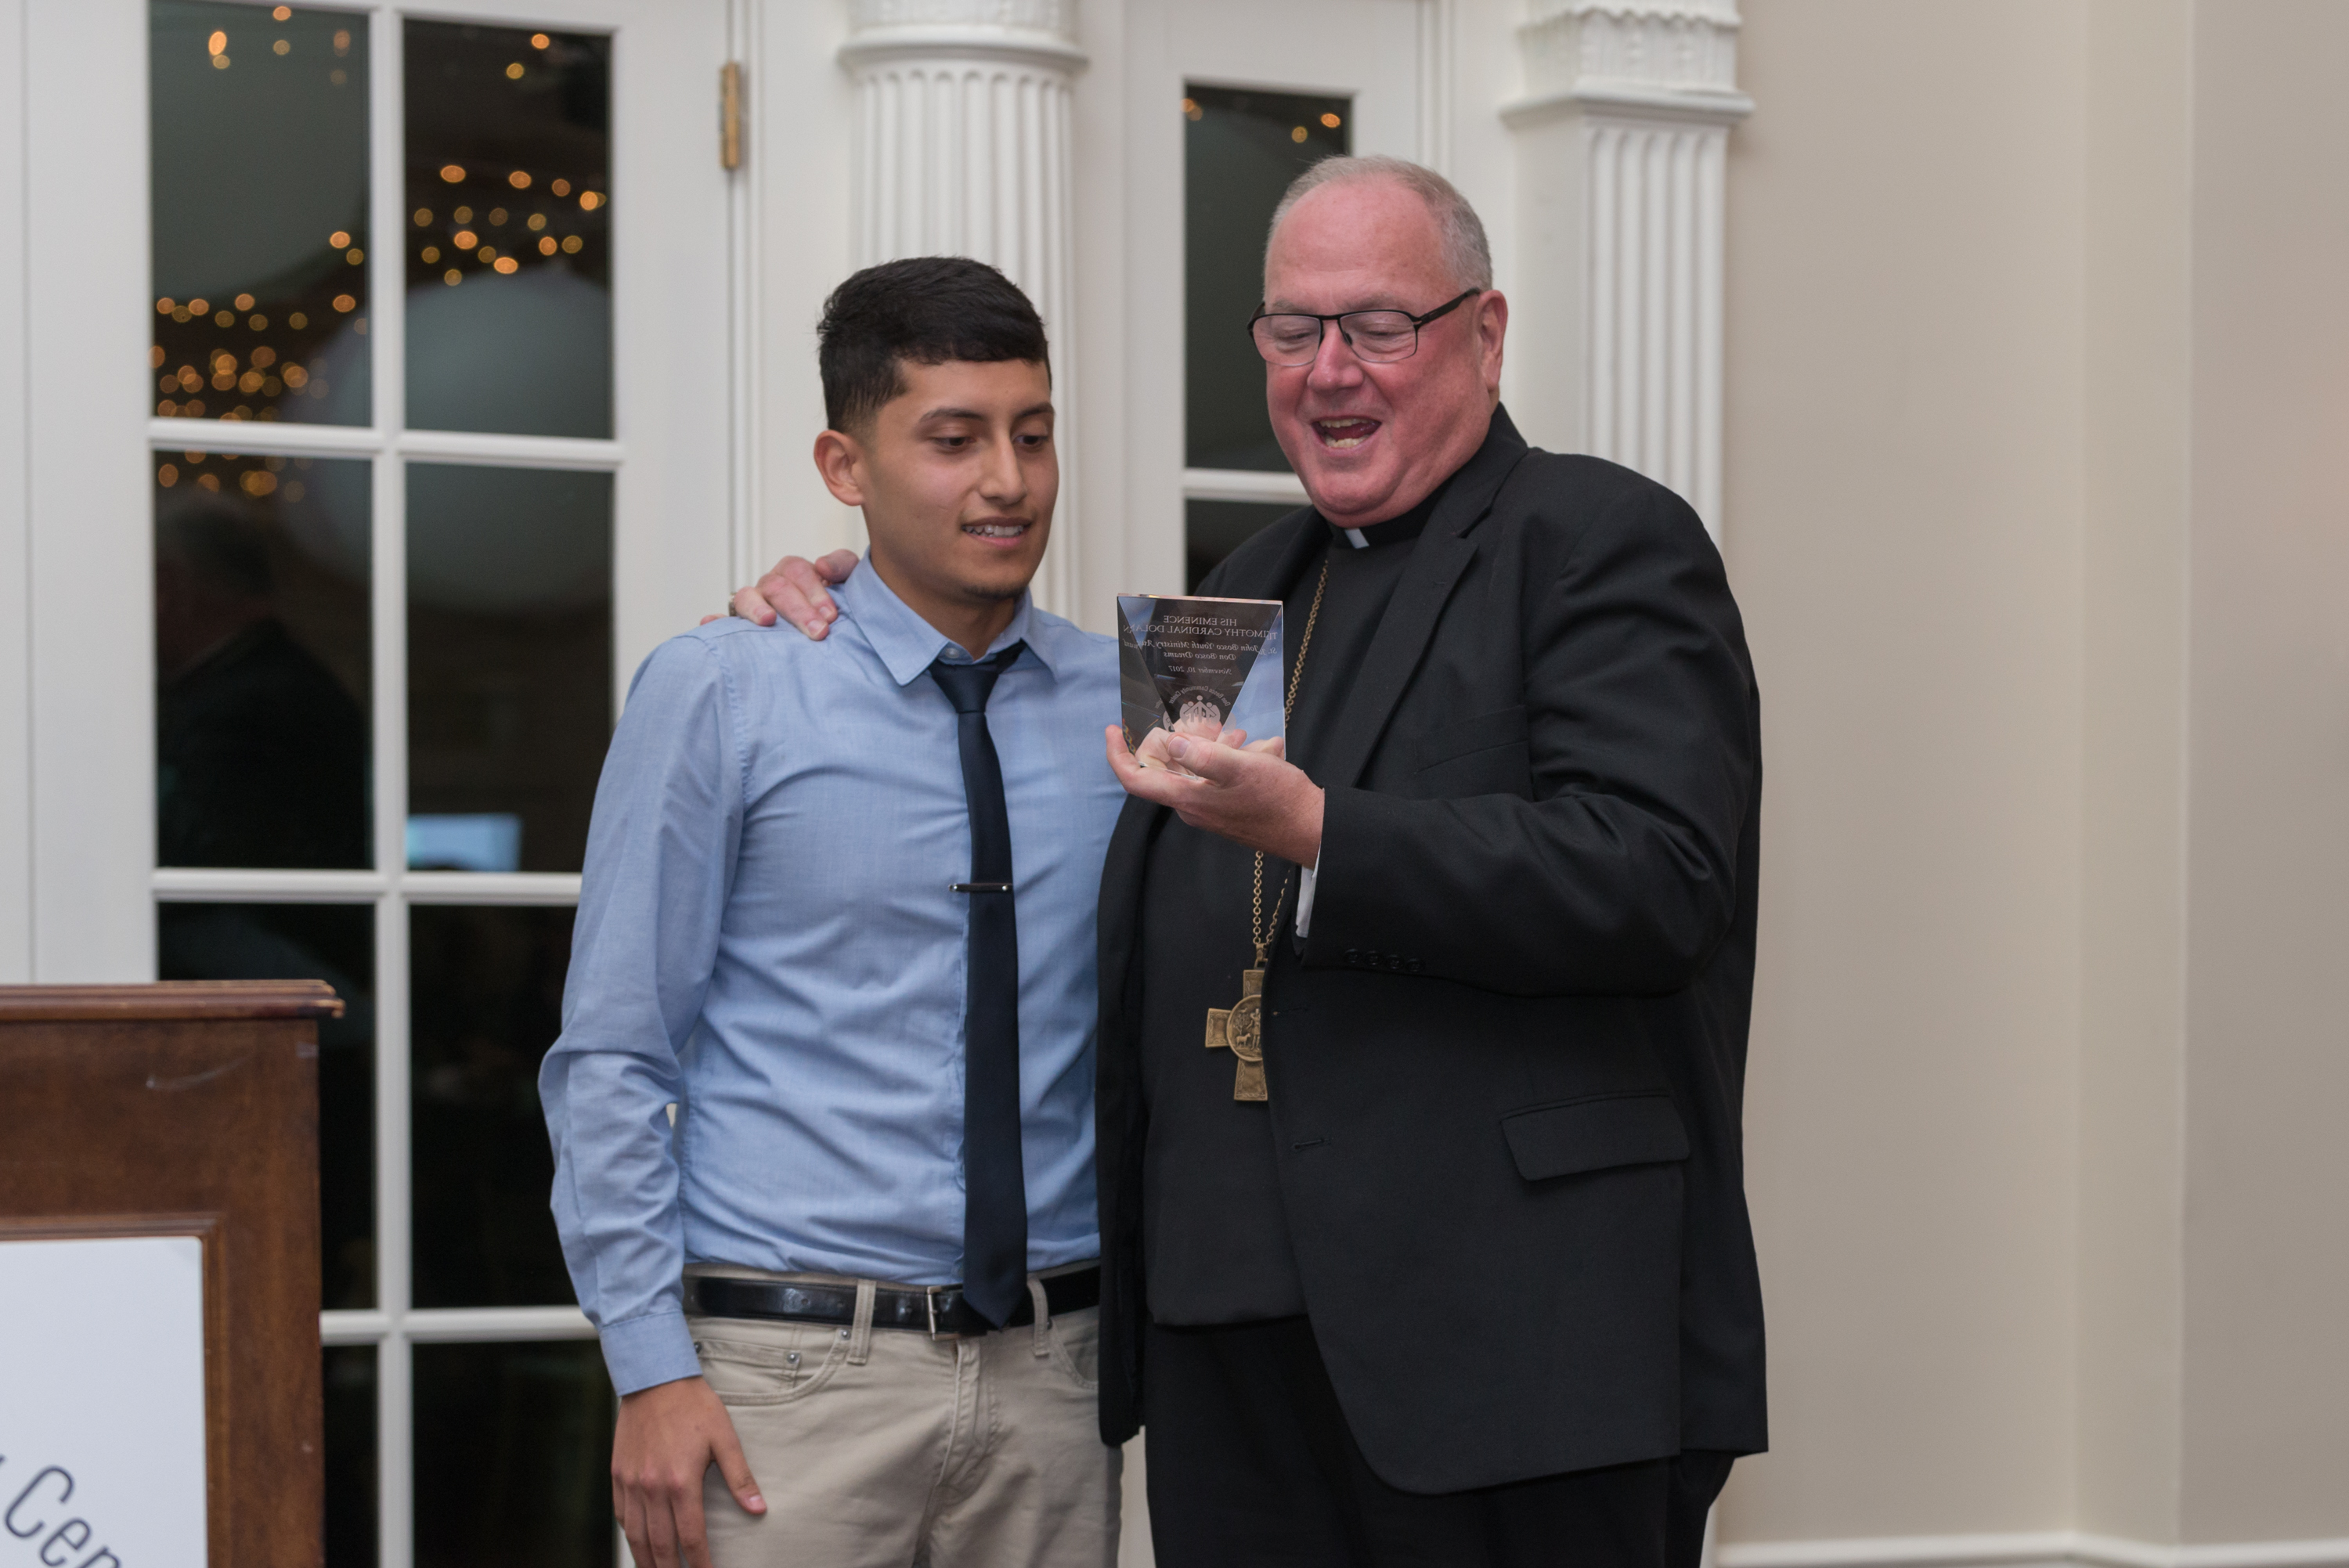 His Eminence Timothy Cardinal Dolan, Archdiocese of New York, St. John Bosco Youth Ministry Award, presented by Kevin Reyes